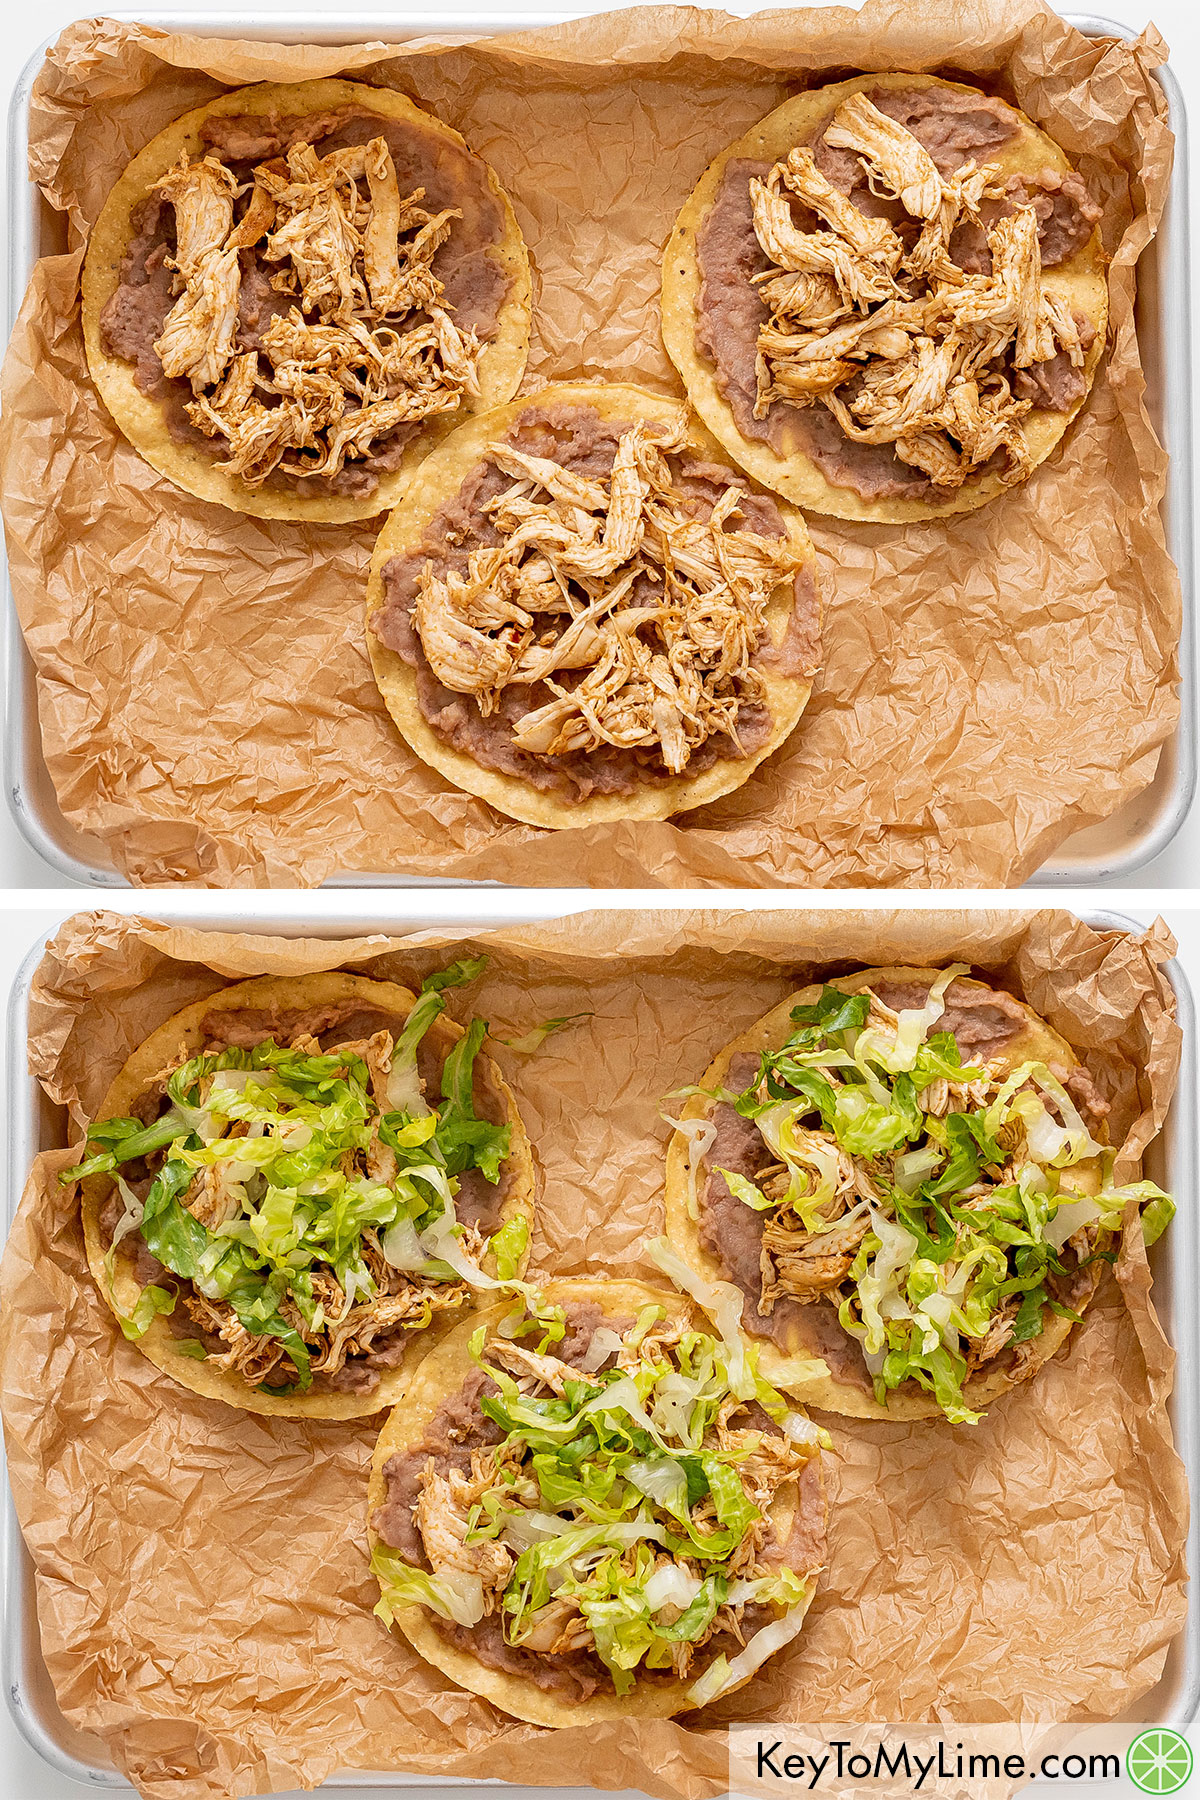 Adding freshly shredded chicken and lettuce to partially started chicken tostadas.